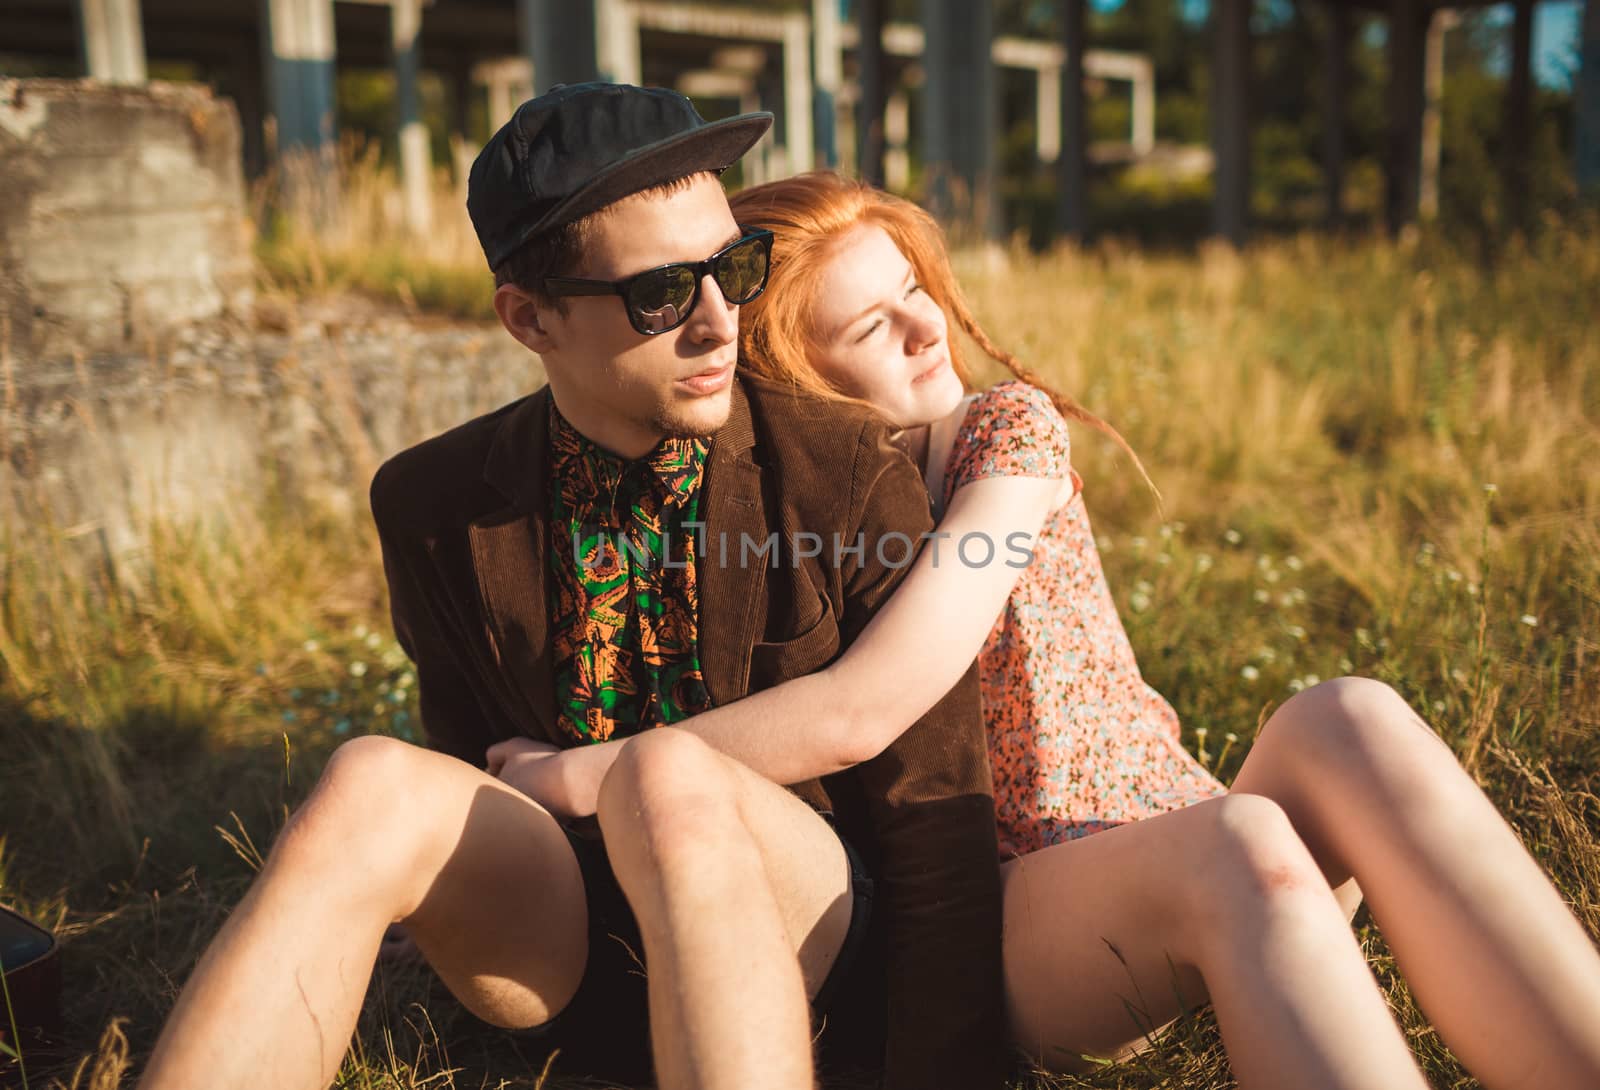 Young stylish couple - girl and guy with a vintage suitcase outdoors